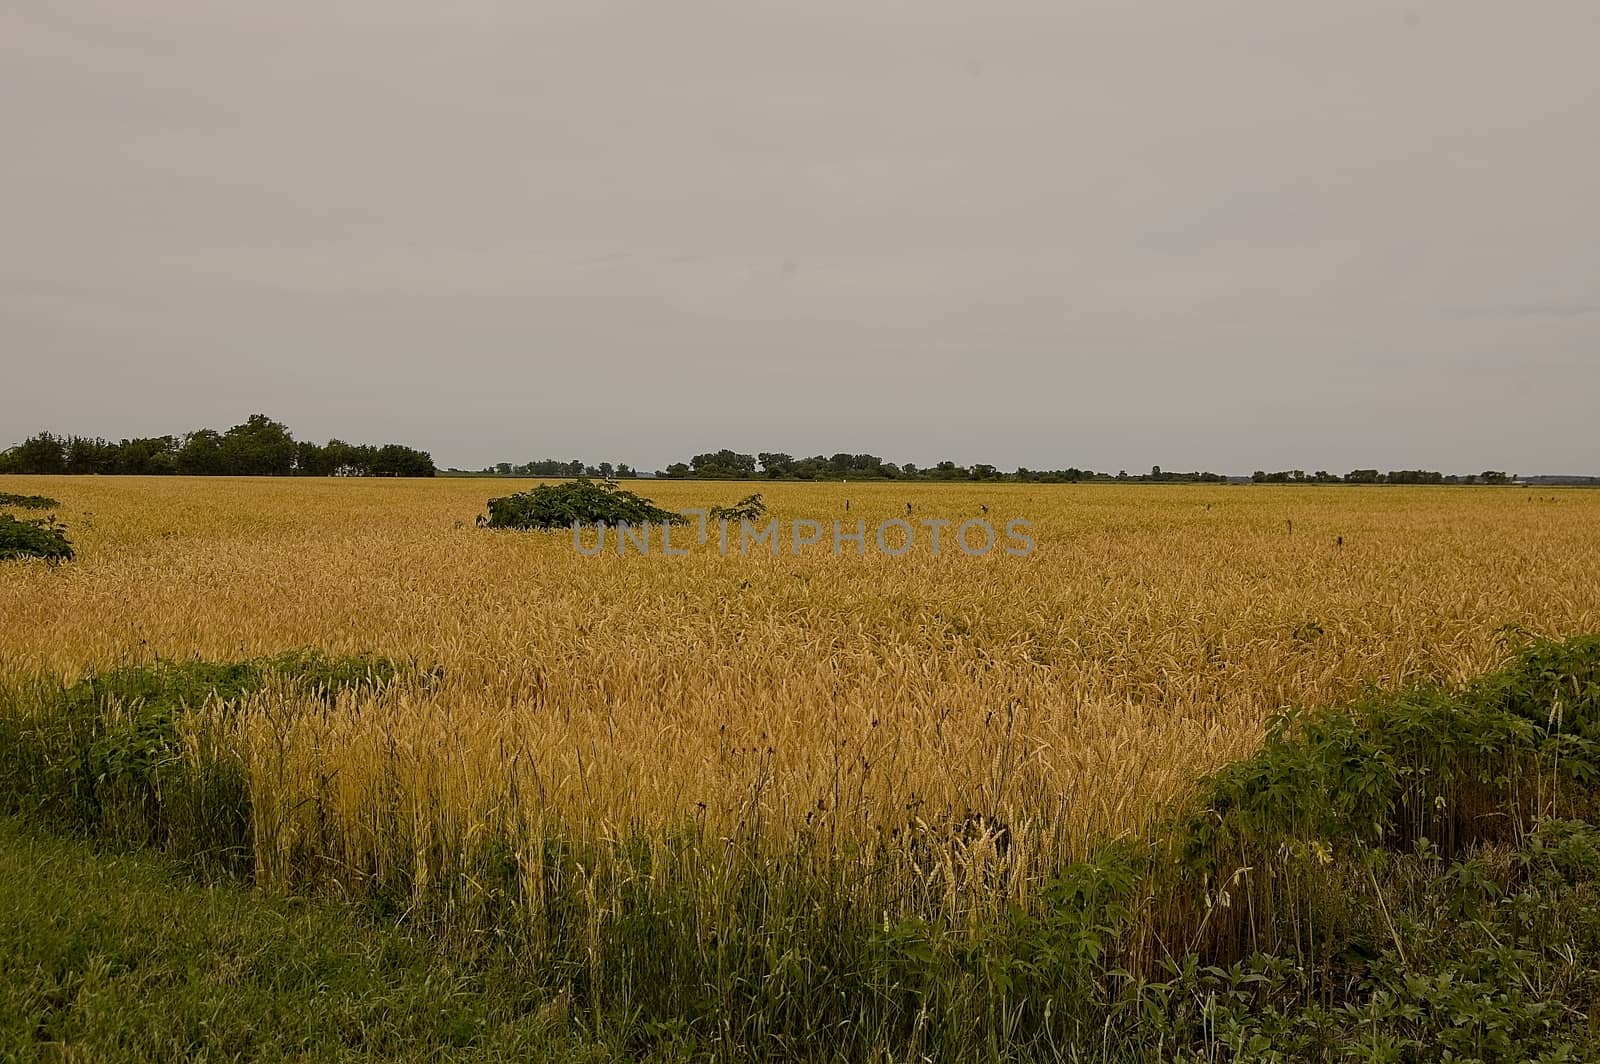 This is a wheat field awaiting harvest time in the summer.